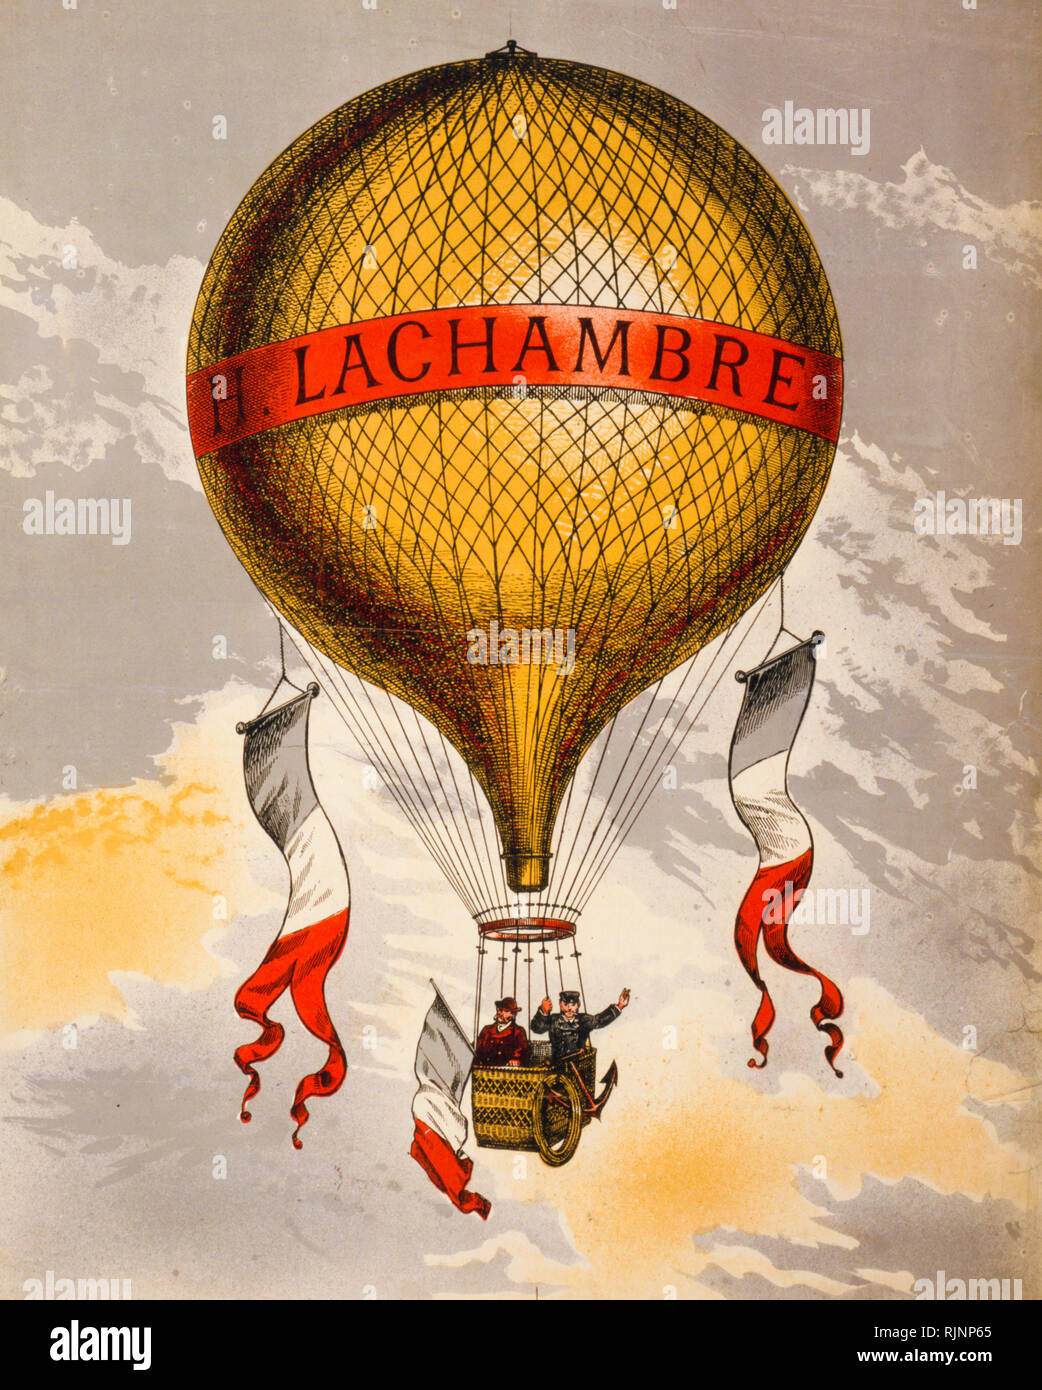 Ballooning Over Paris 1890 Vintage Airline Advert Print Old Photo Retro Poster 